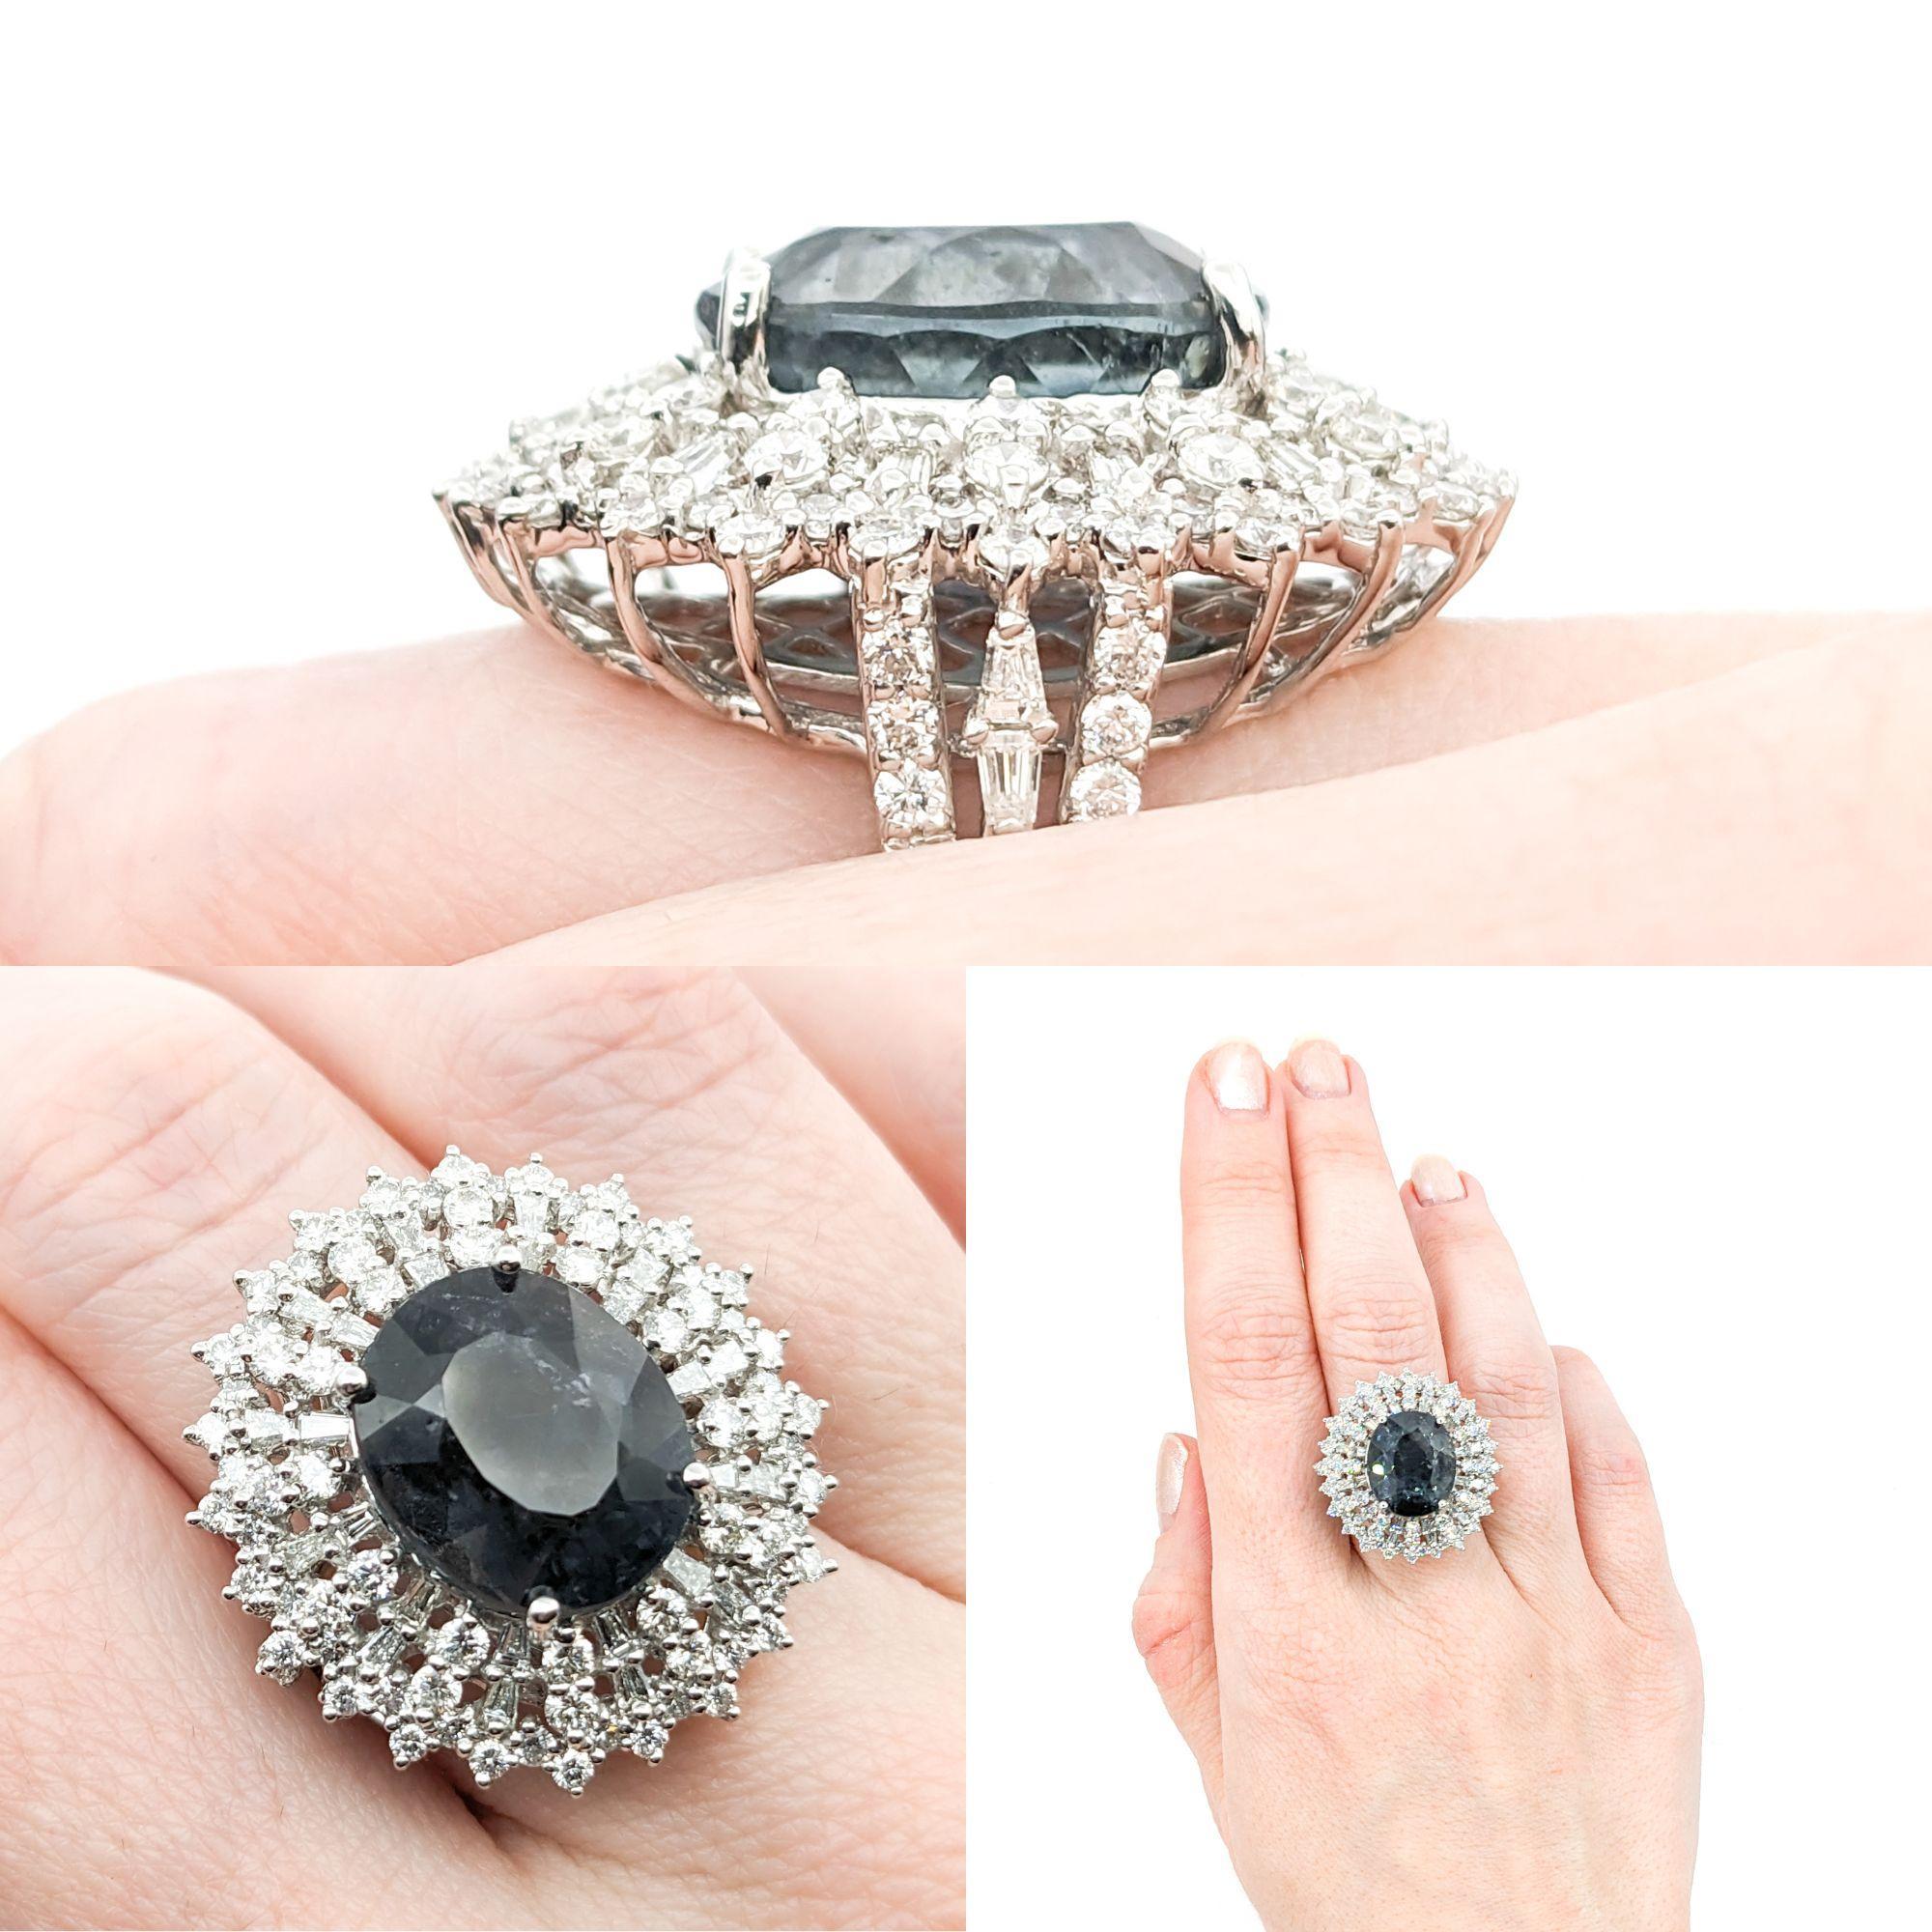 10.27ct Gray Tourmaline & 2.29ctw Diamond Ring In Platinum

Introducing this Truly unique grey tourmaline Ring crafted in premium Platinum. This luxurious piece features a captivating 10.27ct Tourmaline centerpiece with a mesmerizing grey